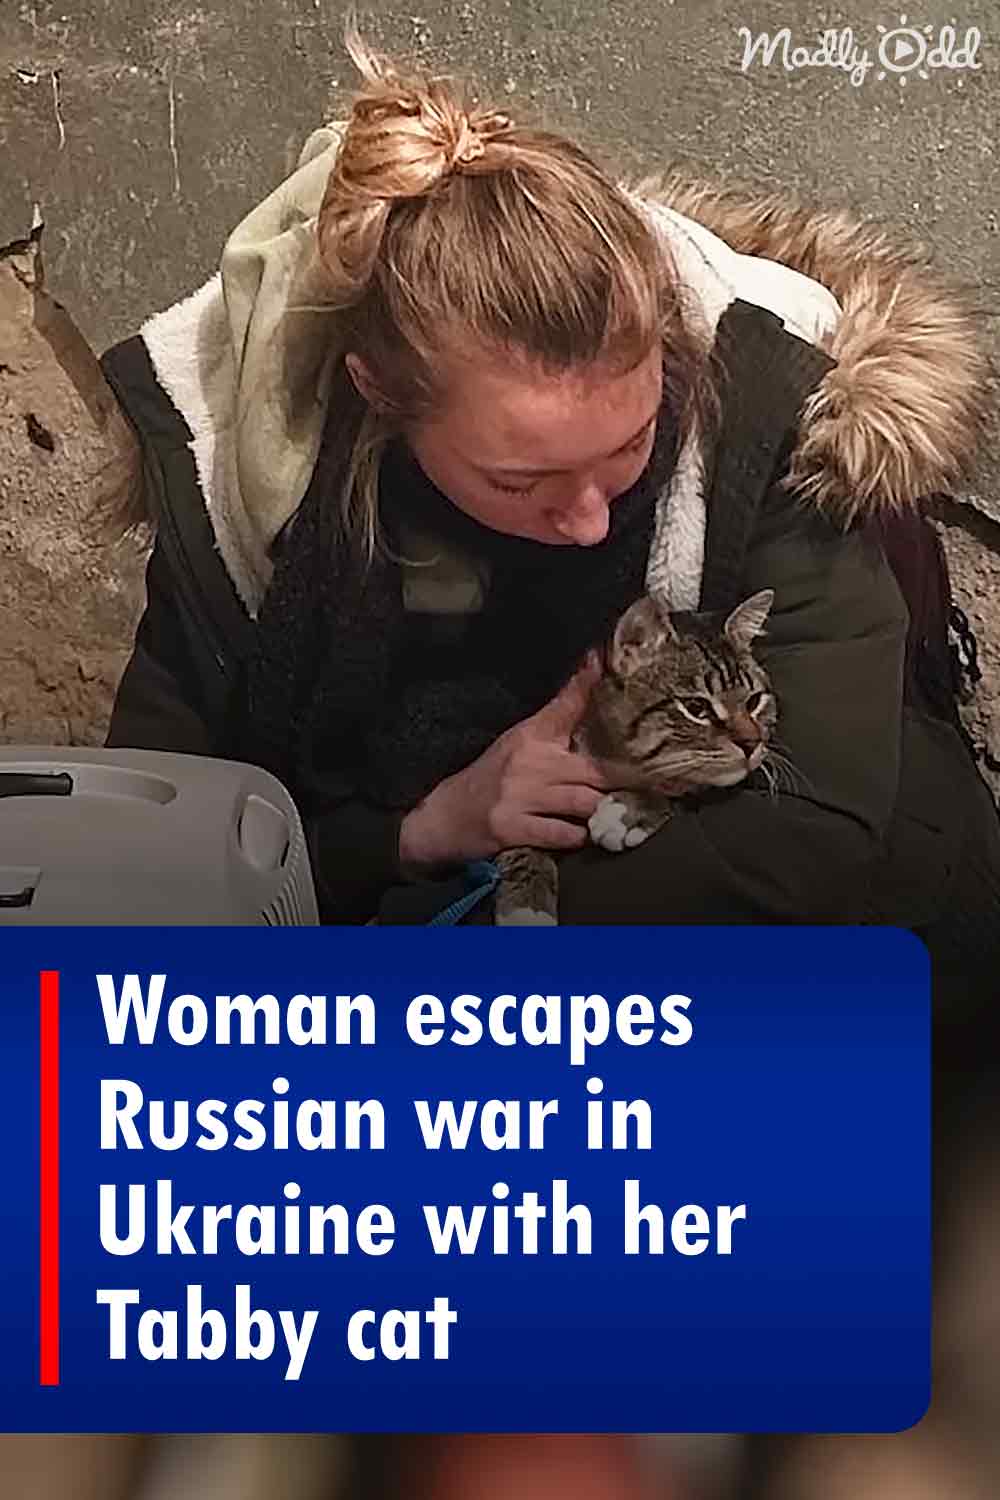 Woman escapes Russian war in Ukraine with her Tabby cat